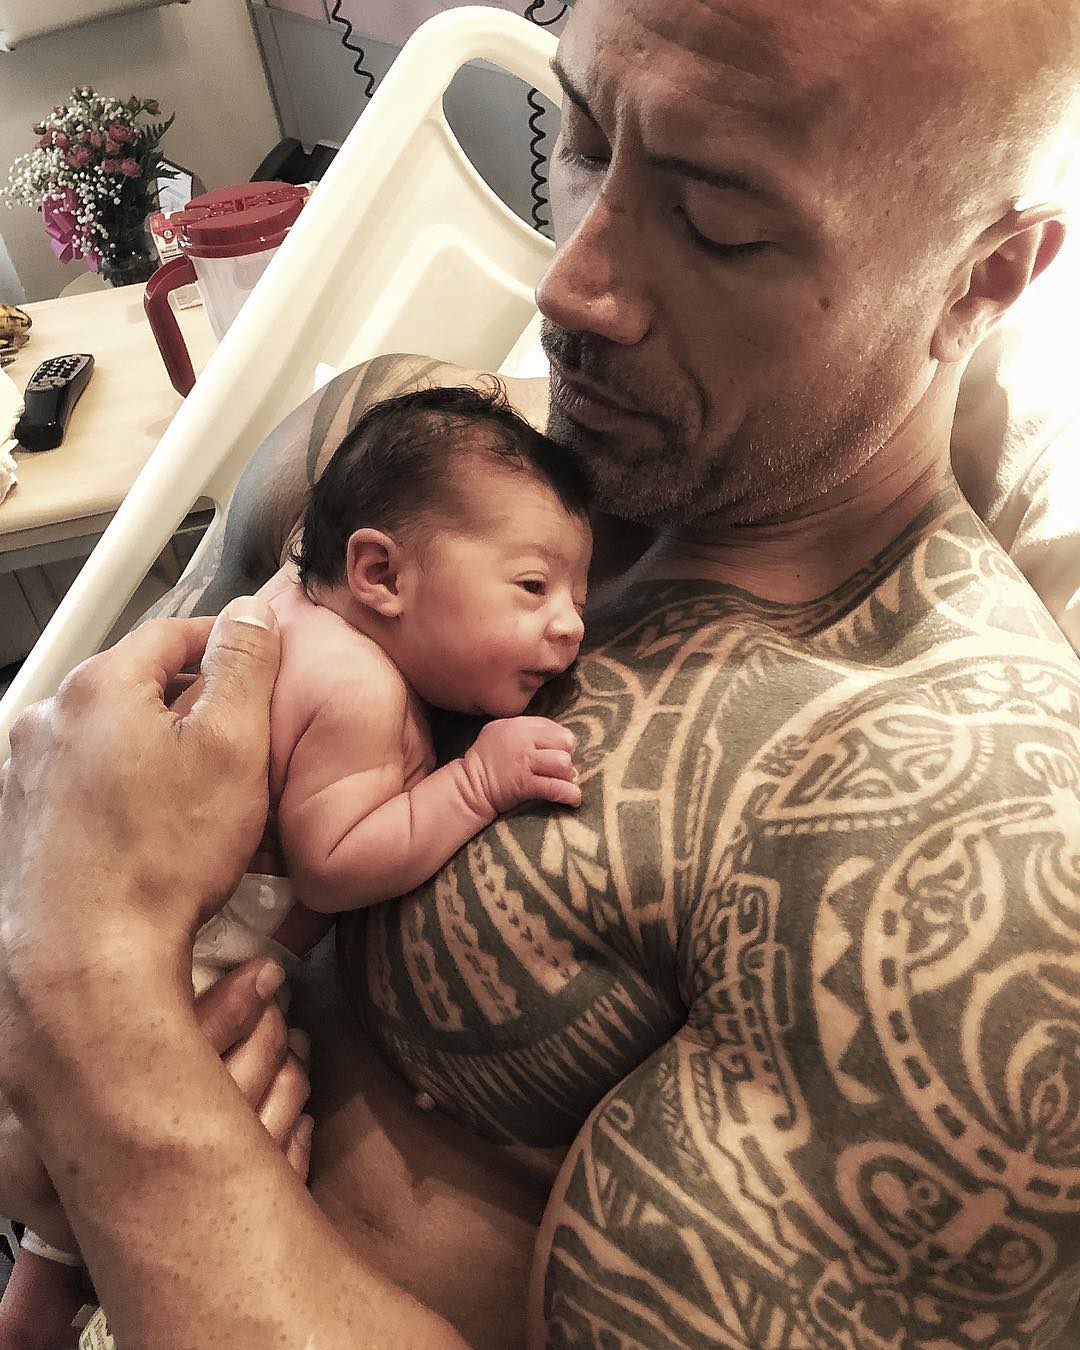 The Rock's daughter